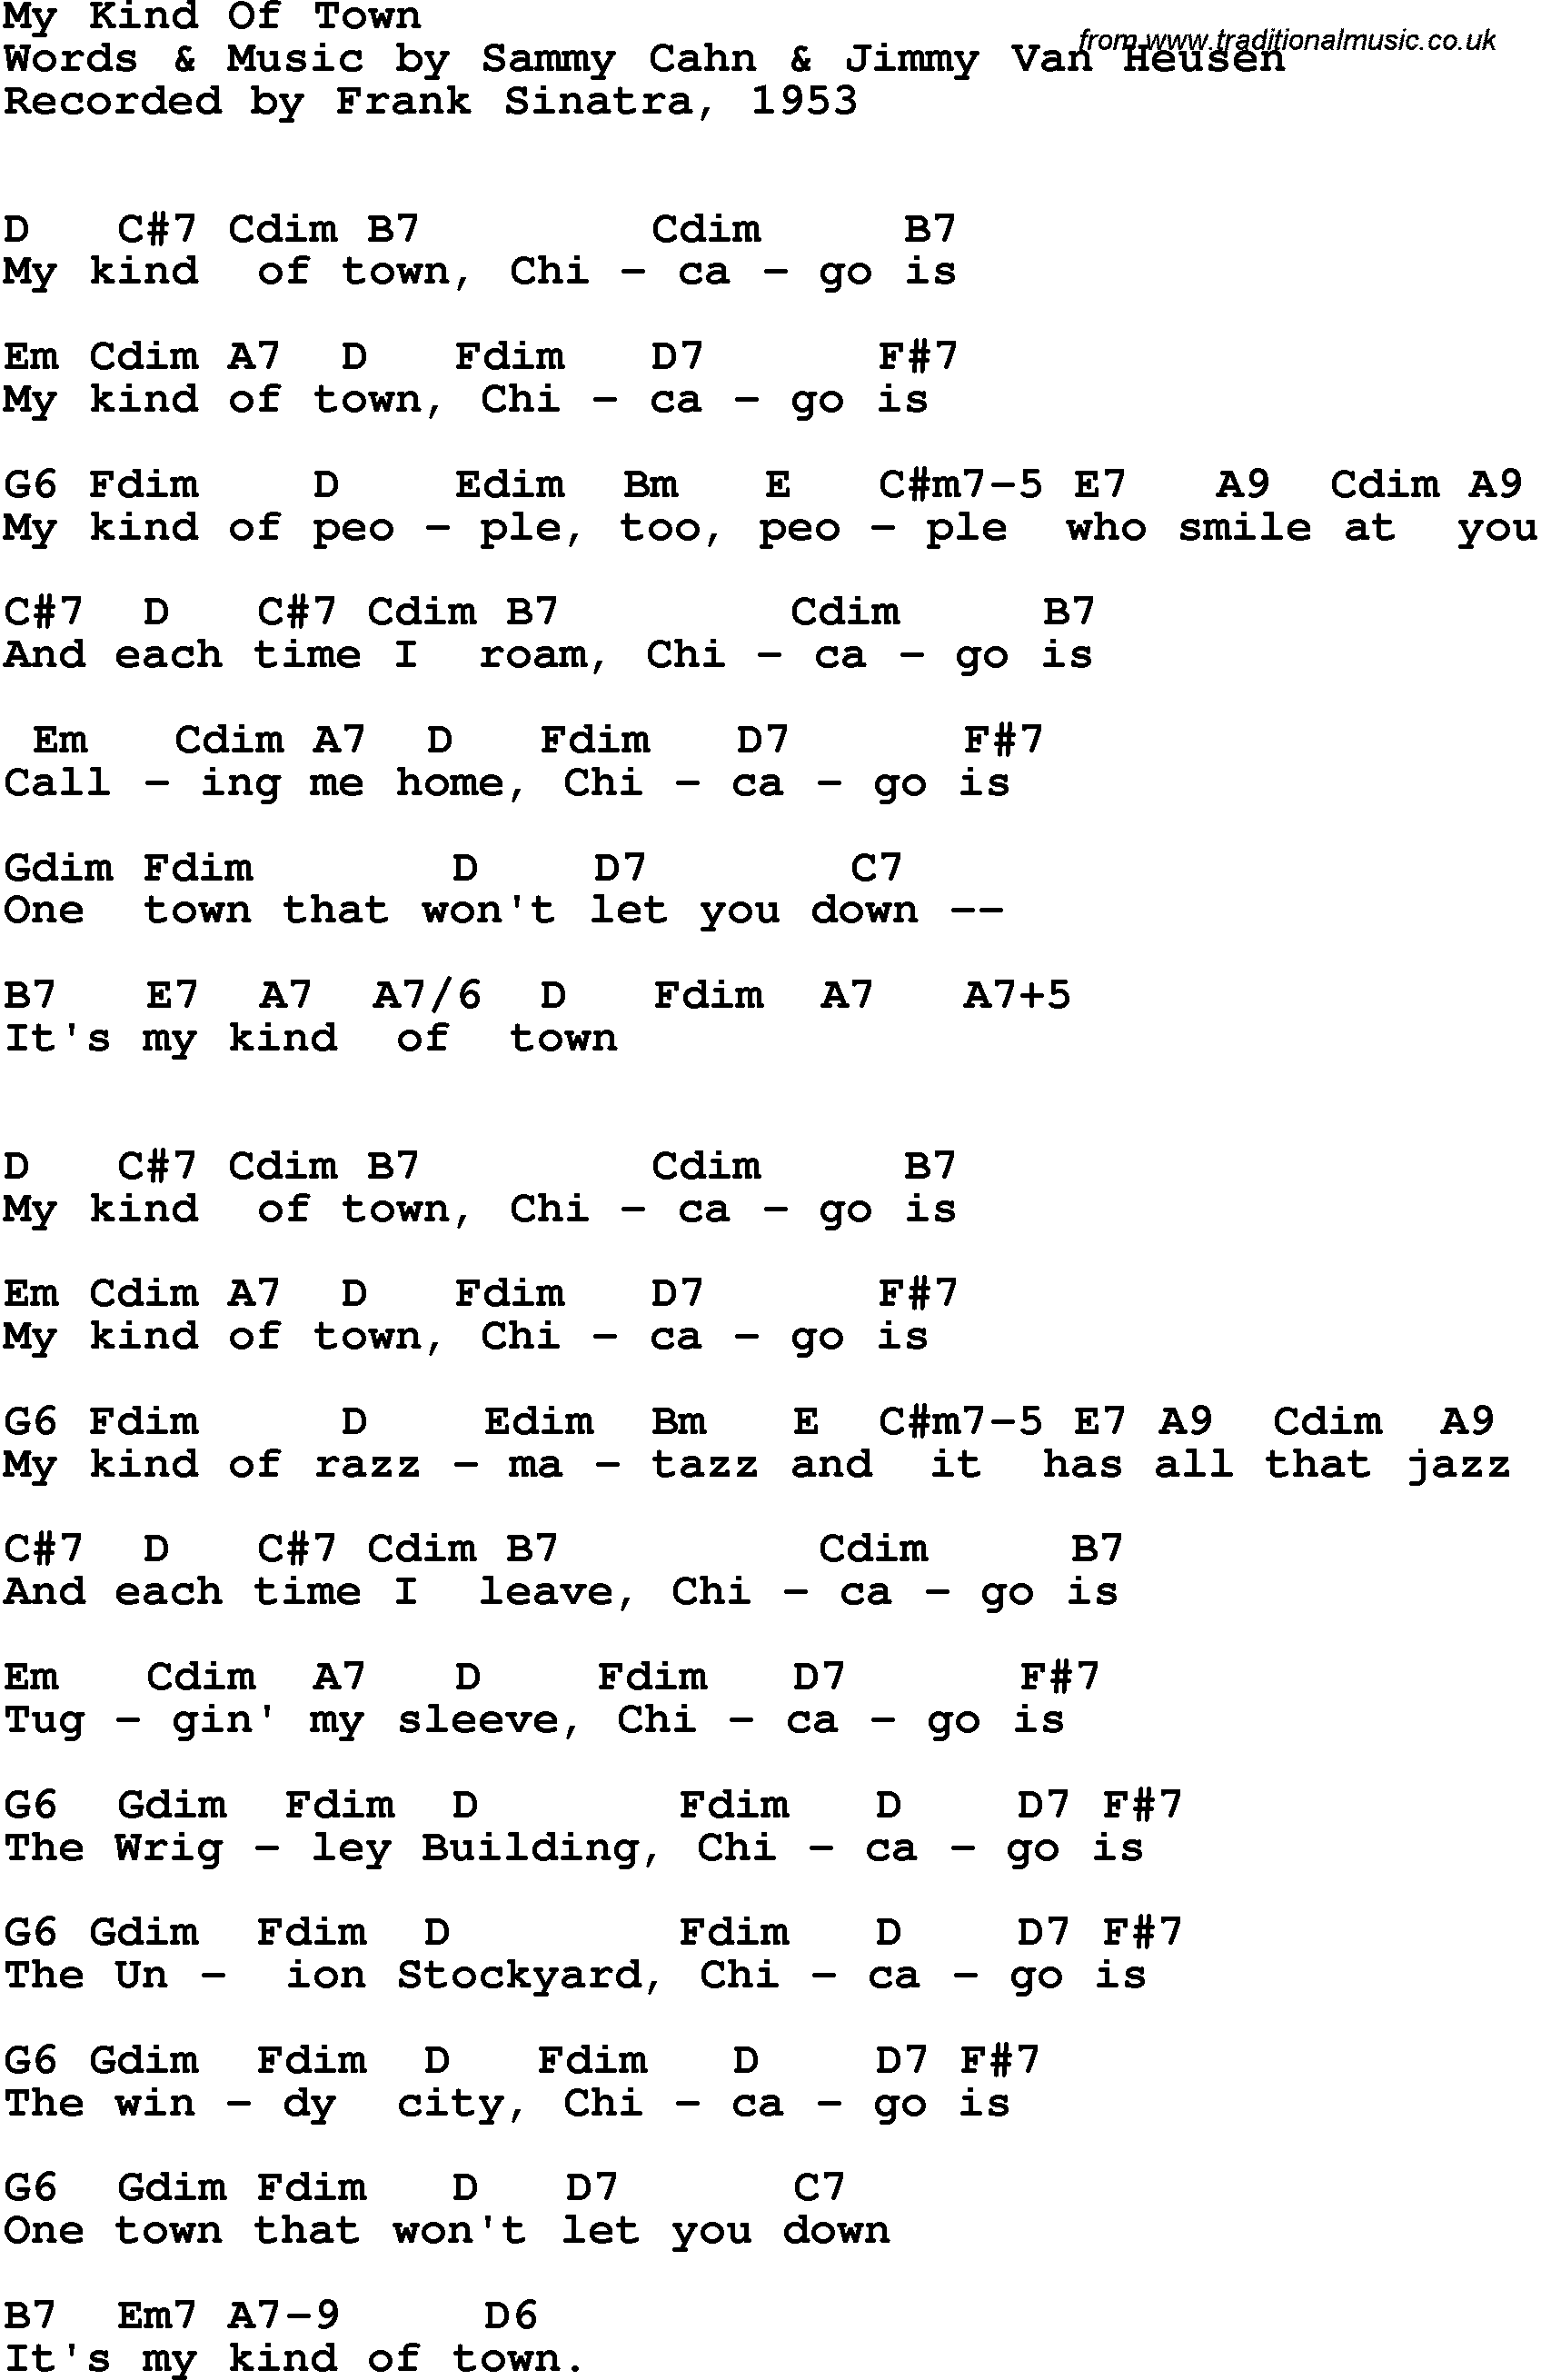 Song Lyrics with guitar chords for My Kind Of Town - Frank Sinatra, 1953